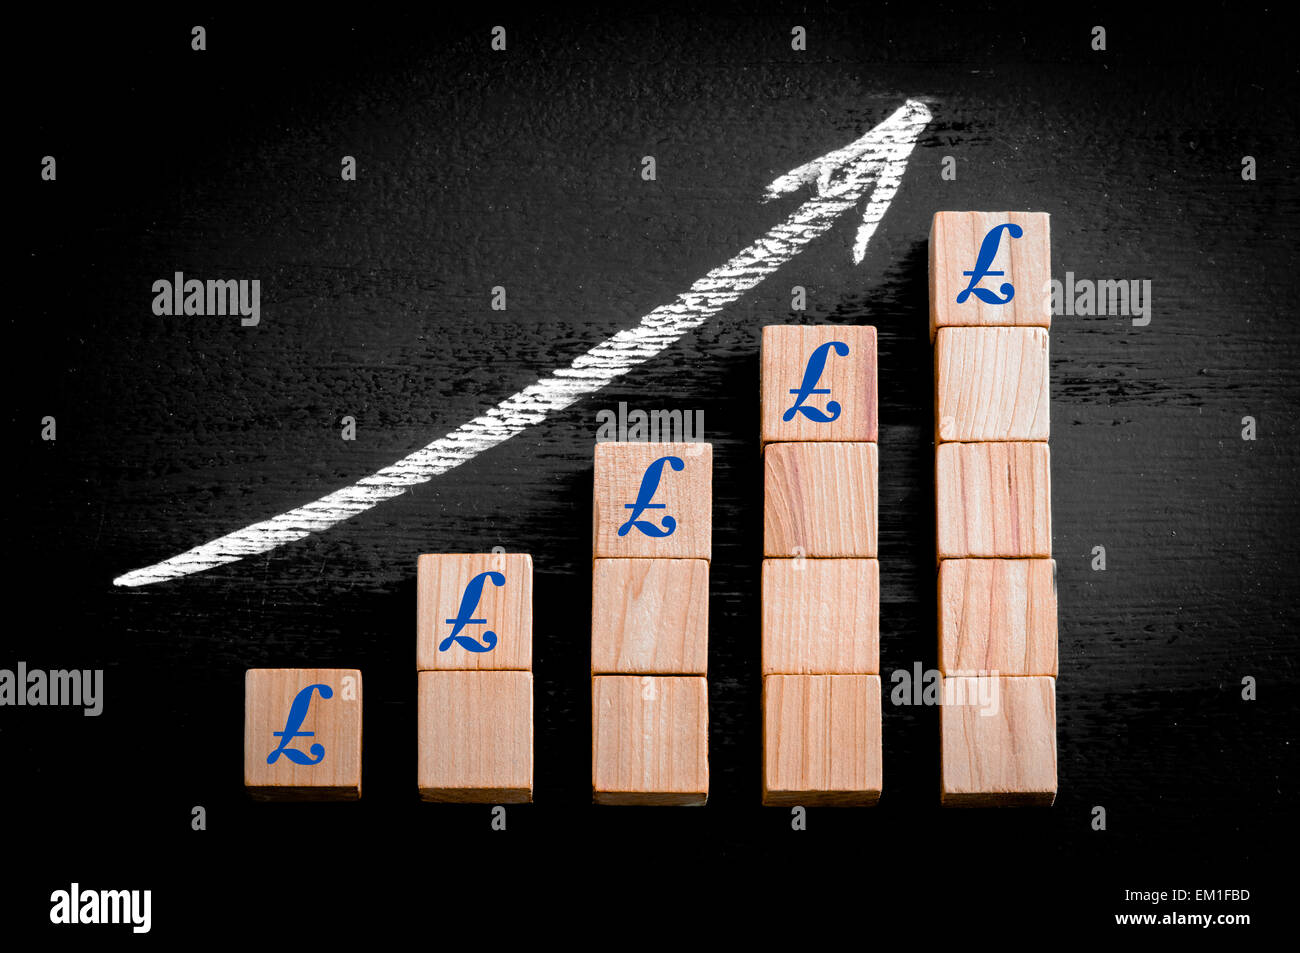 BRITISH POUND SIGN on ascending arrow above bar graph of Wooden small cubes isolated on black background. Chalk drawing on blackboard. Business Concept image. Stock Photo